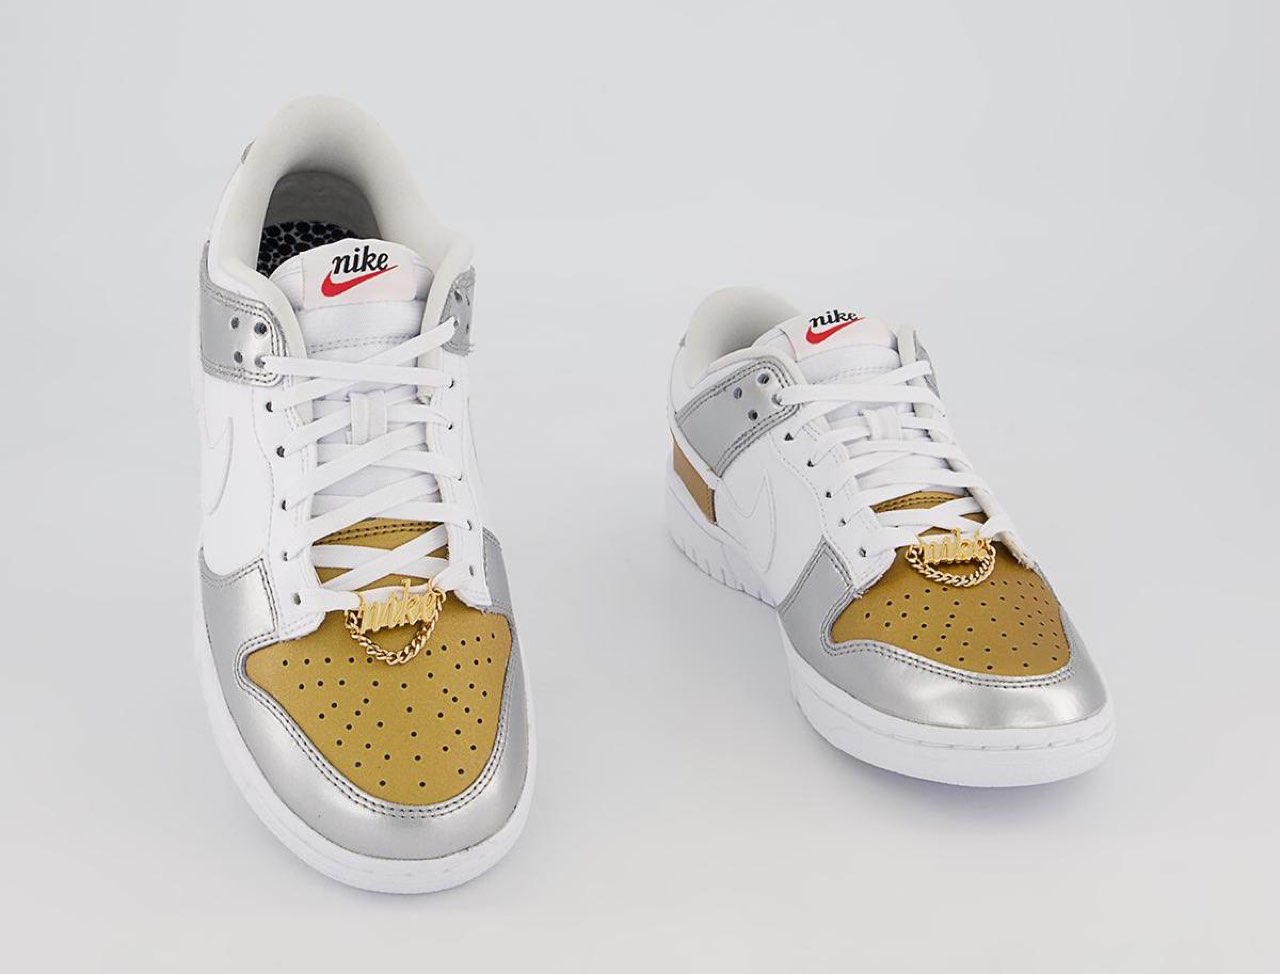 Nike Wmns Dunk Low SE “Heirloom”が国内2月10日に発売予定 | UP TO DATE